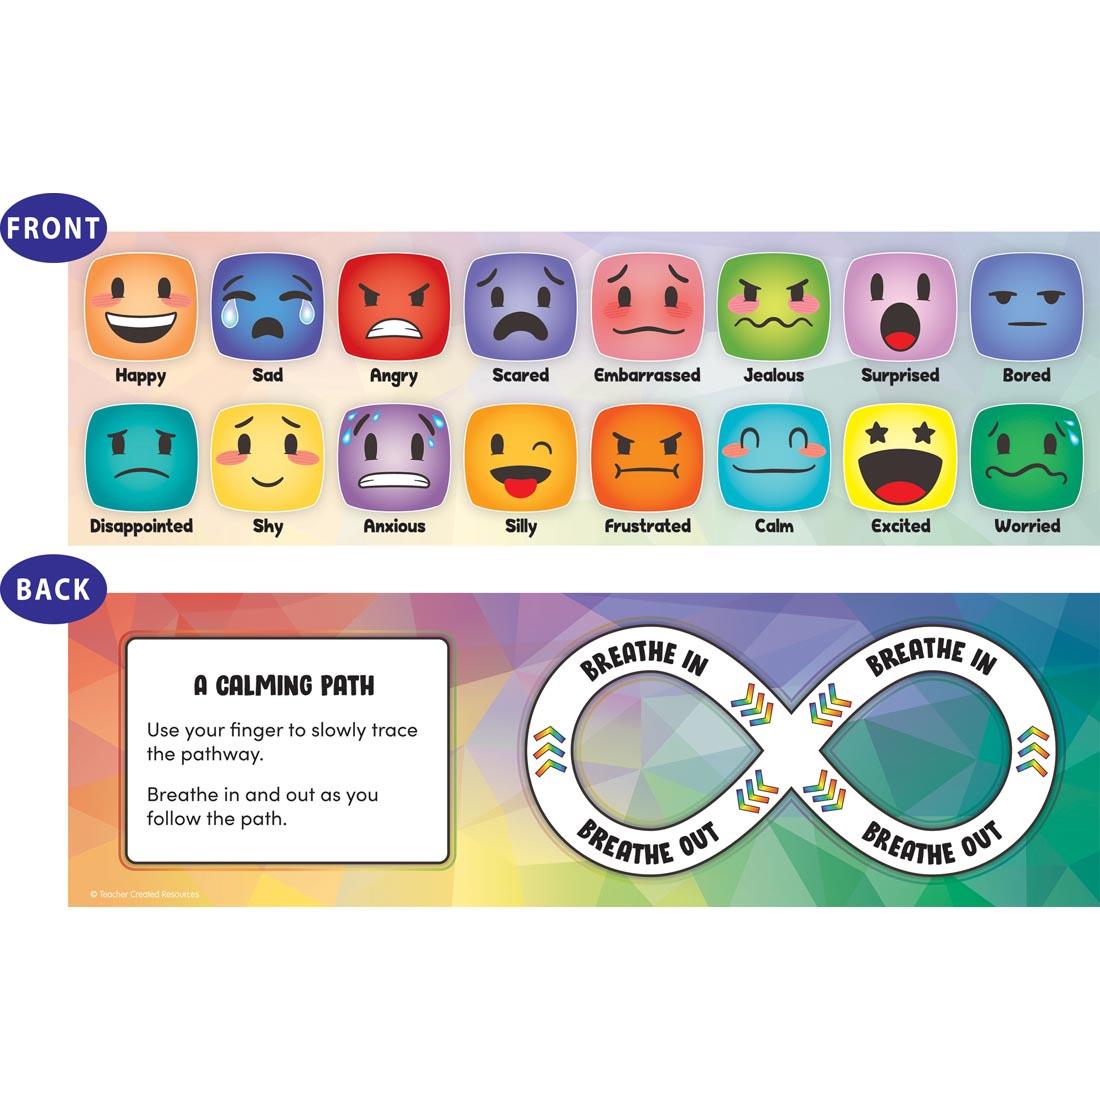 both sides of the Social Emotional Mood Meters labeled Front and Back